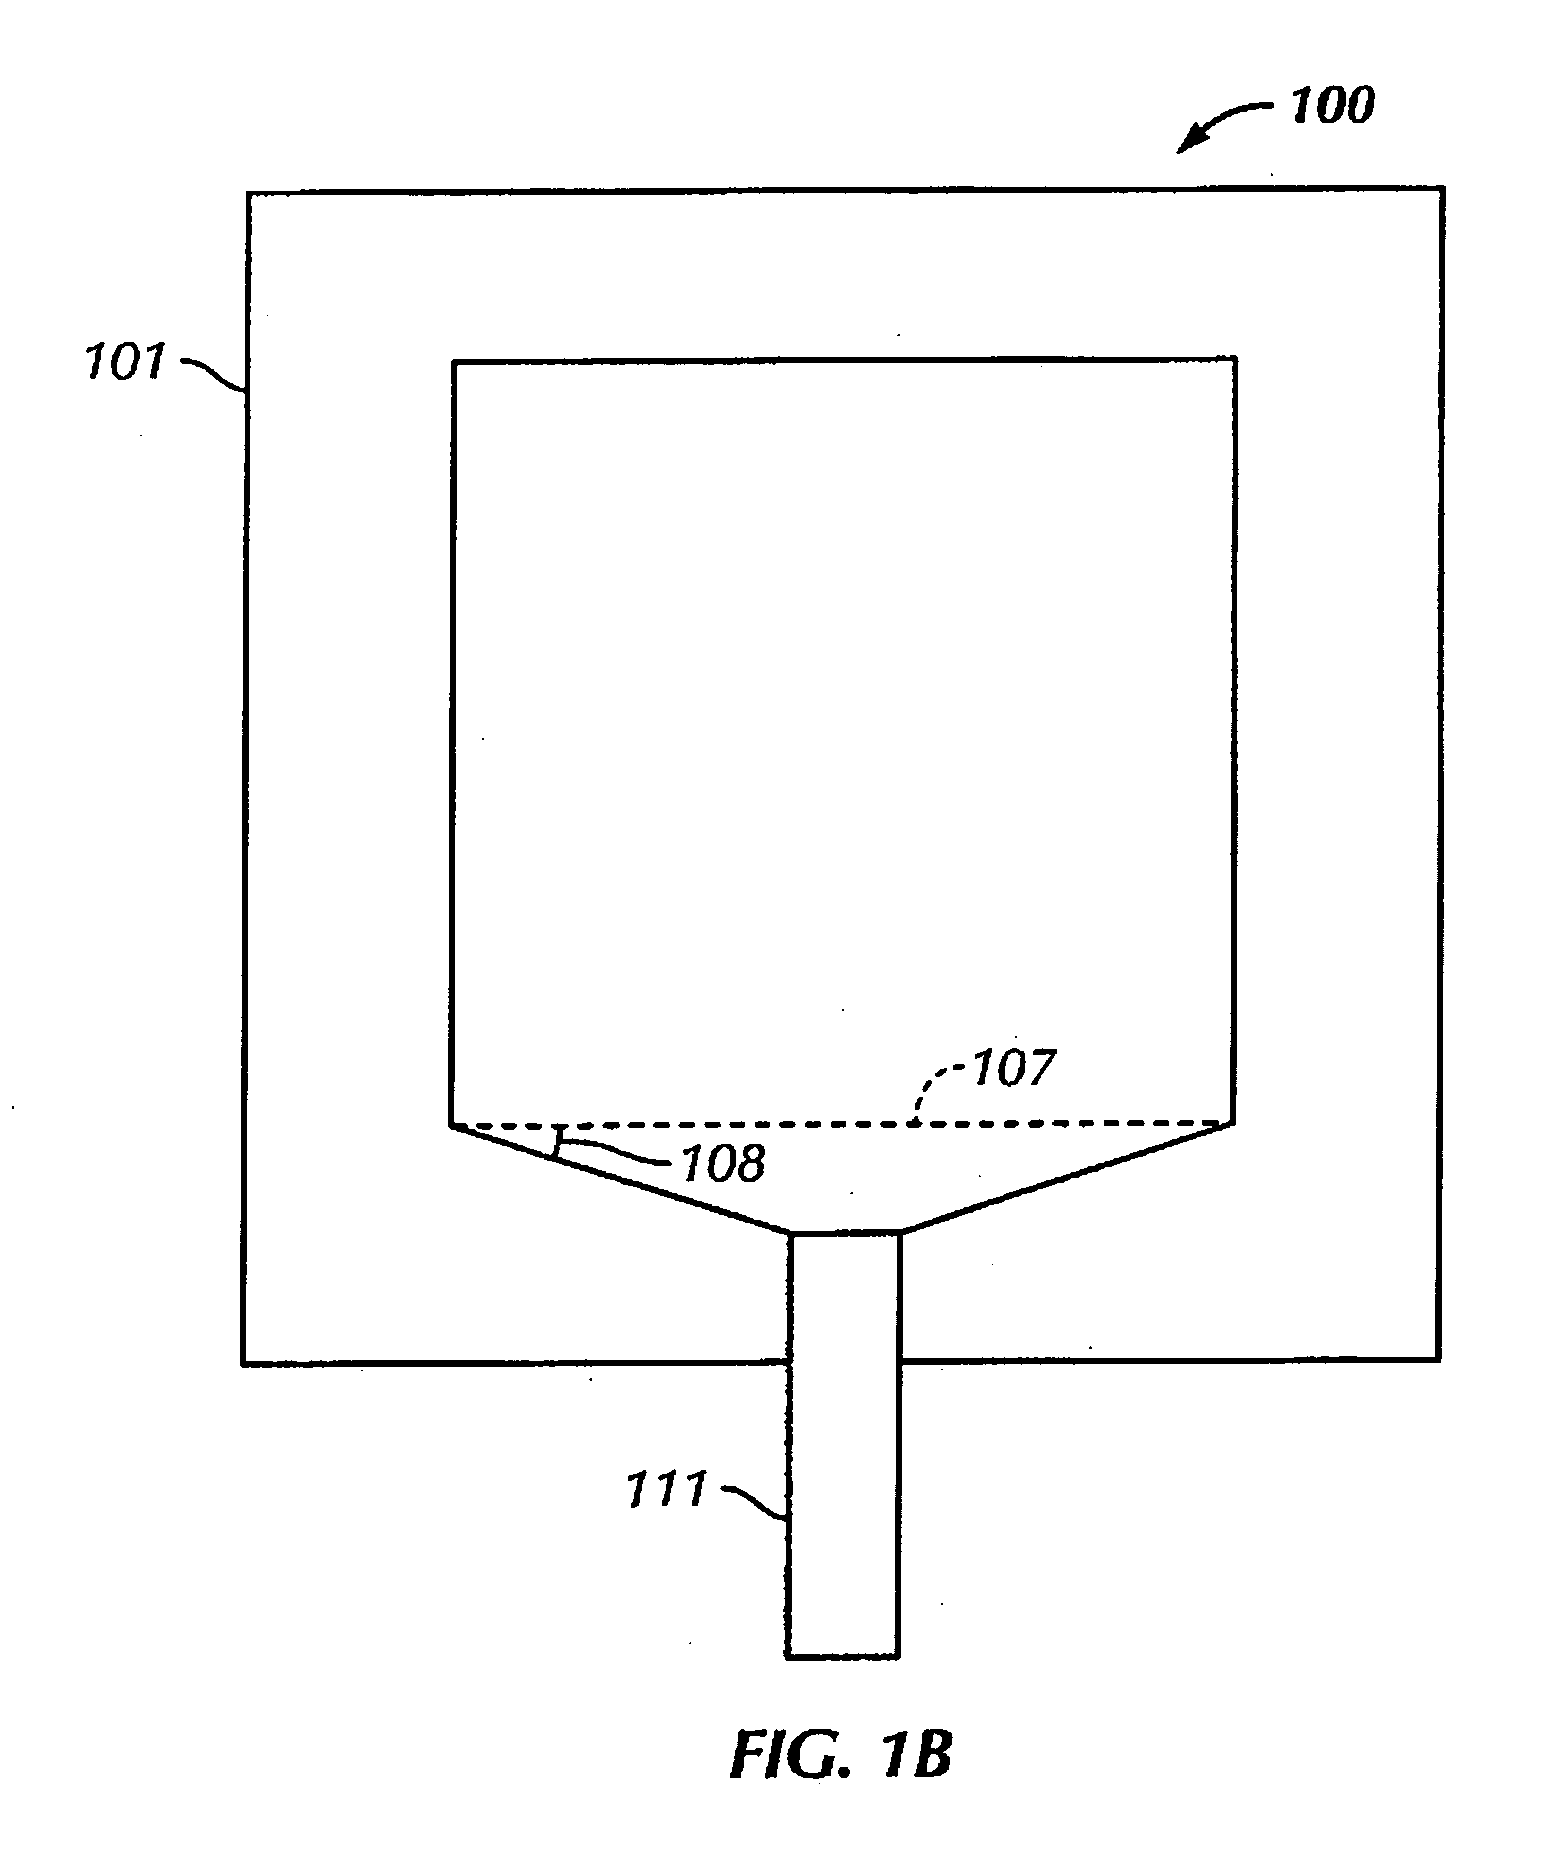 Method and apparatus for automated fluid loss measurements of drilling fluids